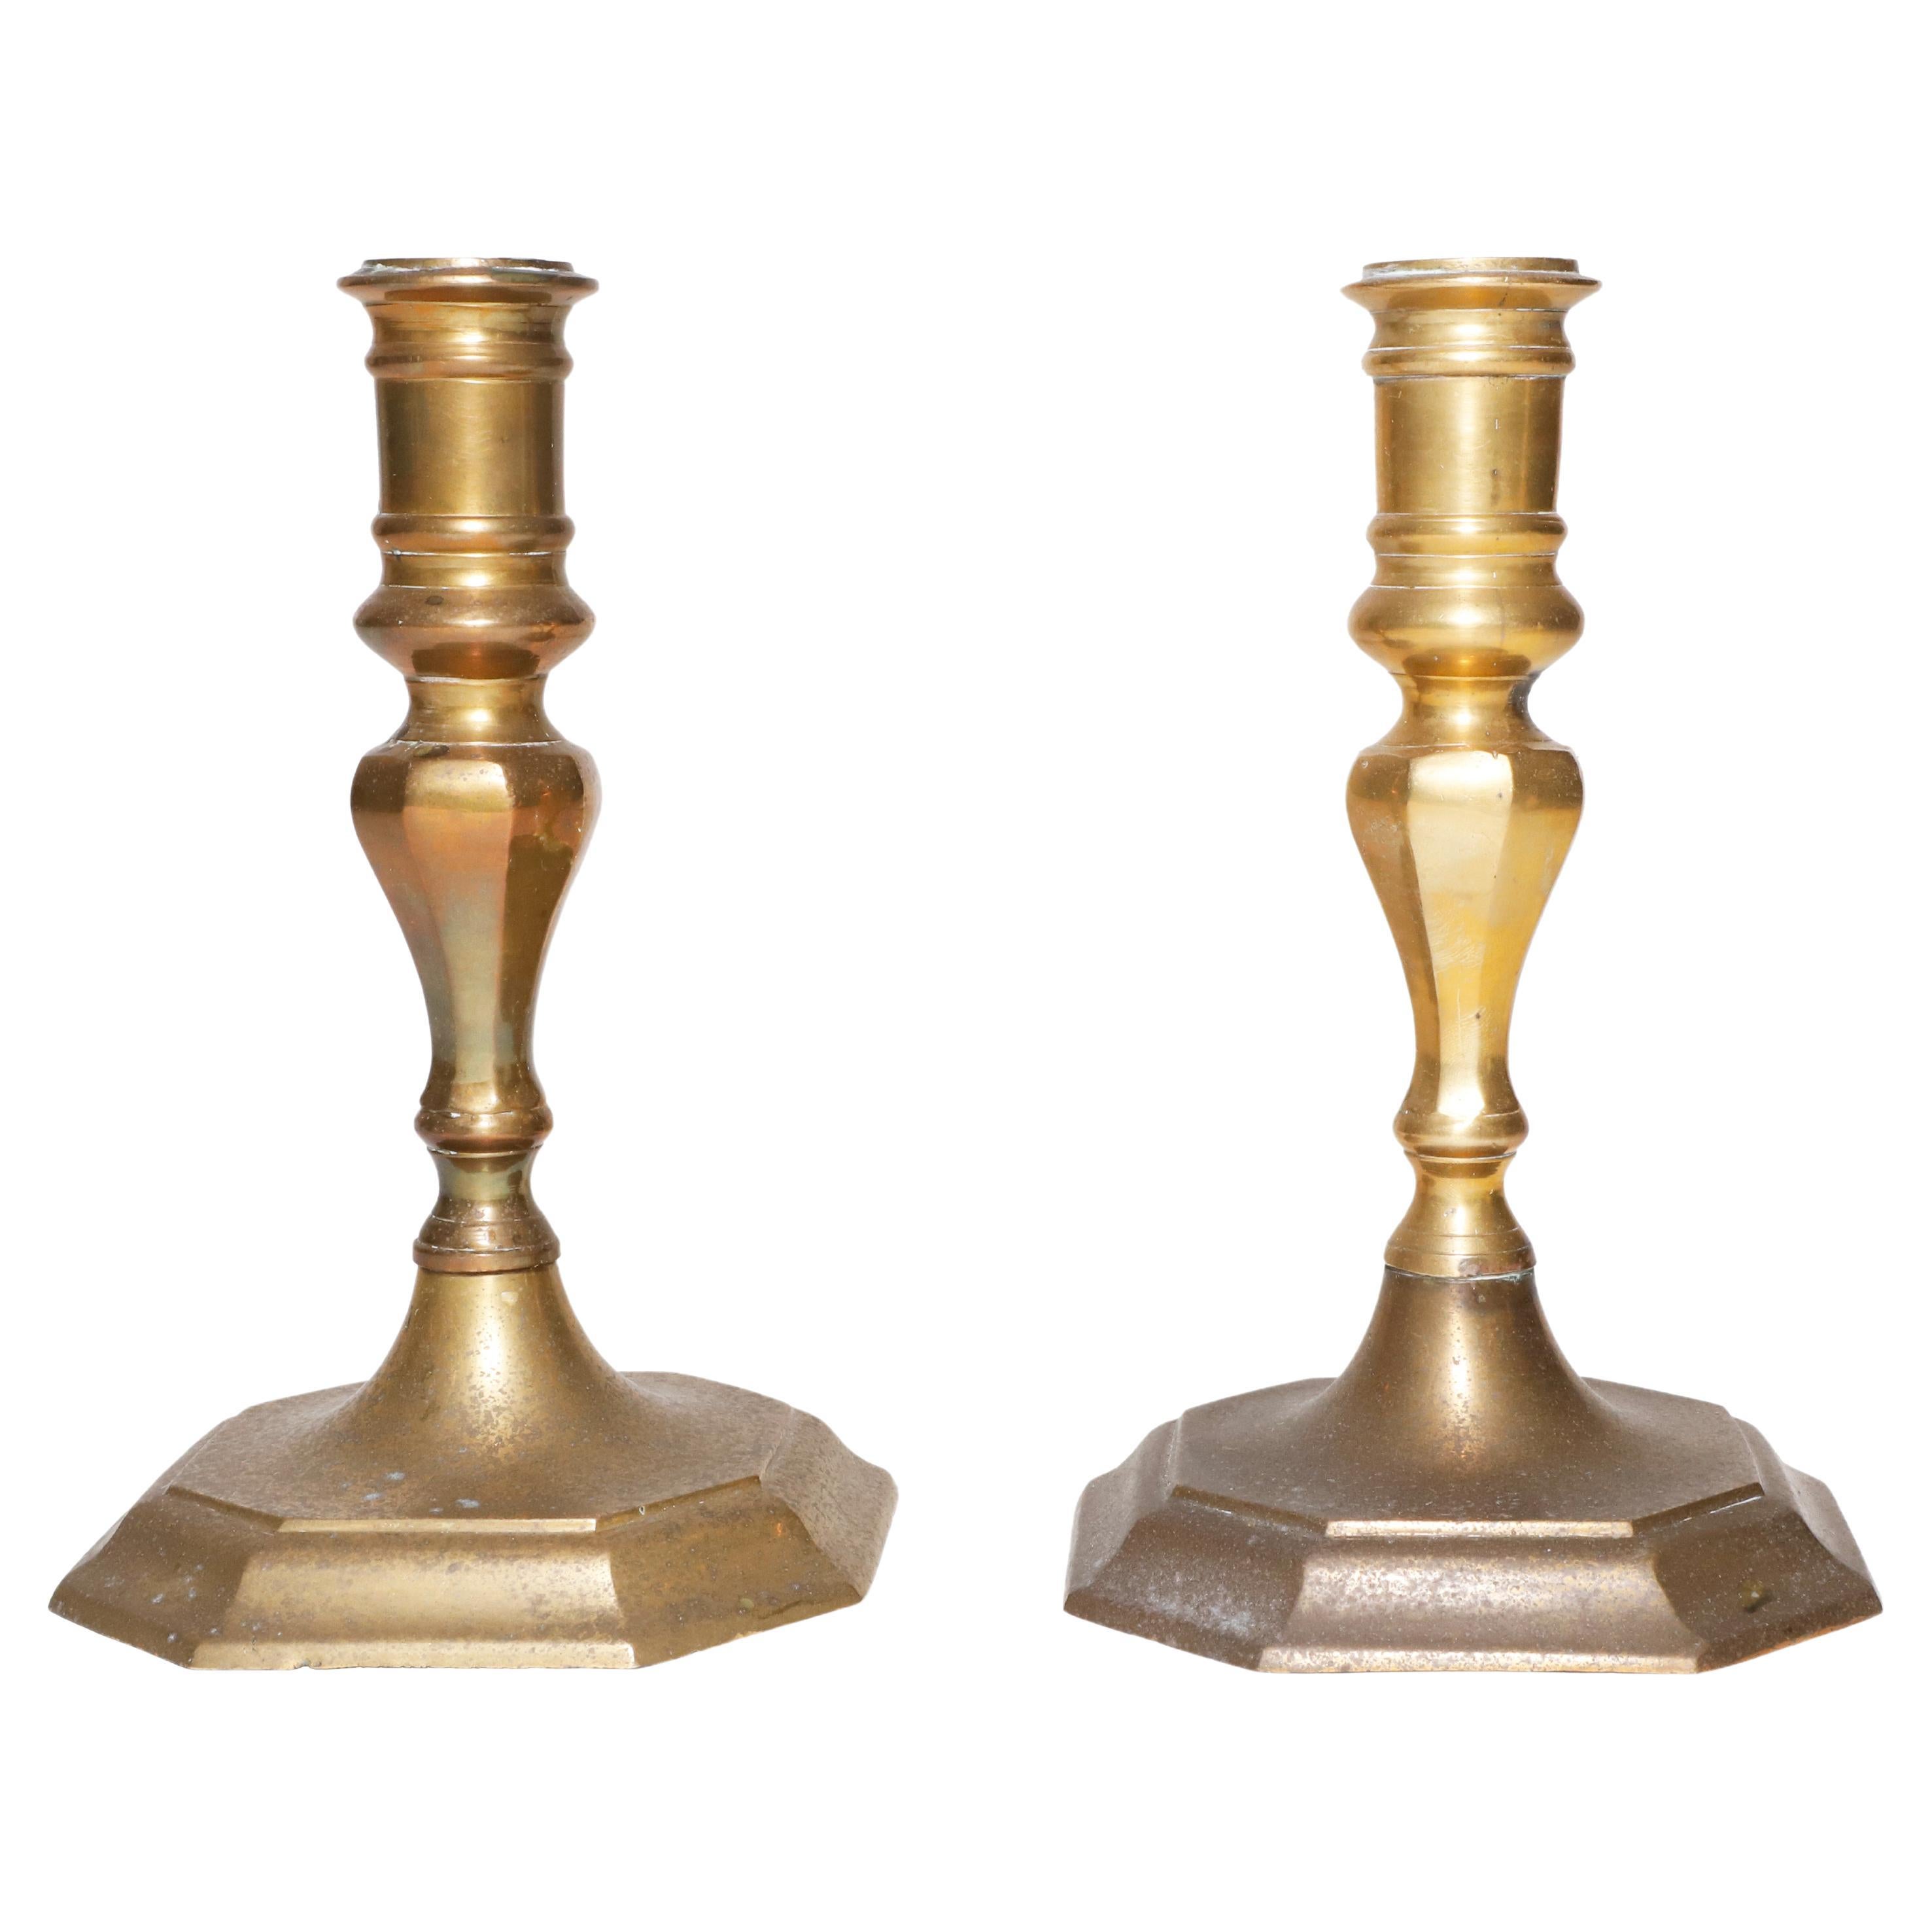 Pair of 19th Century Vintage Brass Candleholders